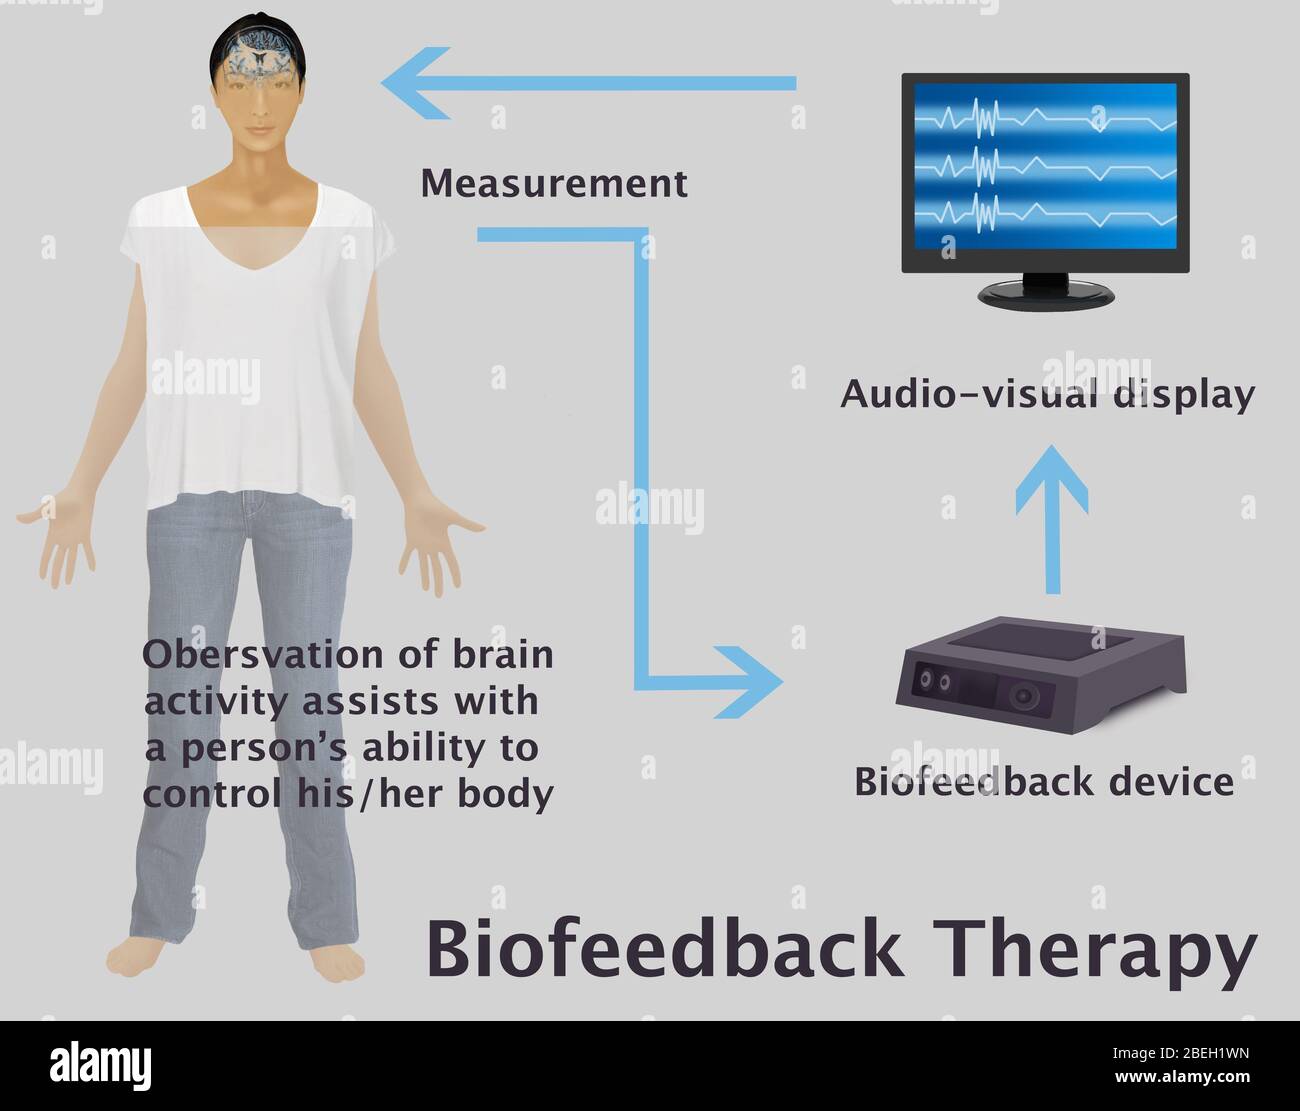 An illustration diagram of the feedback loop between person, sensor (biofeedback device), and processor (audio-visual display) to help provide biofeedback training. Biofeedback is sometimes used to improve health, performance, and the physiological changes that often occur in conjunction with changes to thoughts, emotions, and behavior. Observation of the brains reactions to different situations assists patients with controlling these reactions. Stock Photo